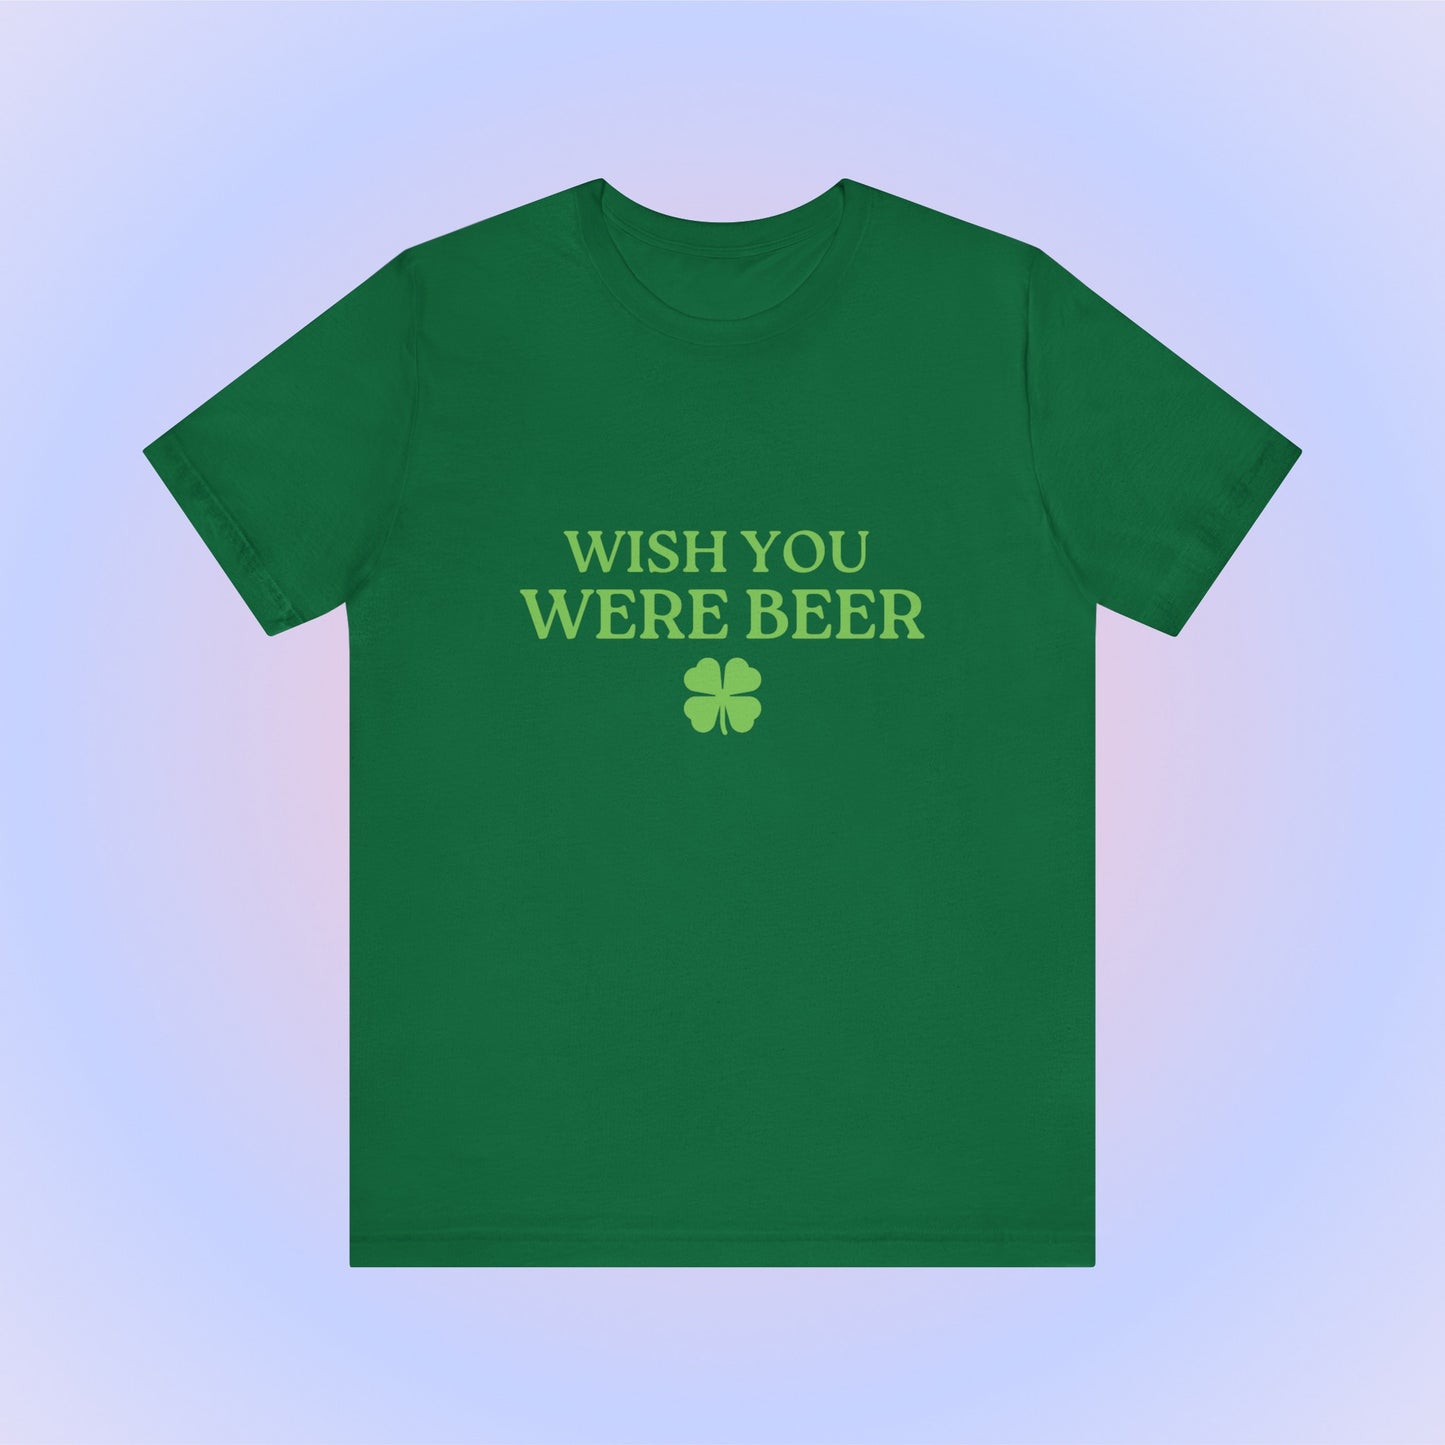 Wish You Were Beer, Soft Unisex T-Shirt